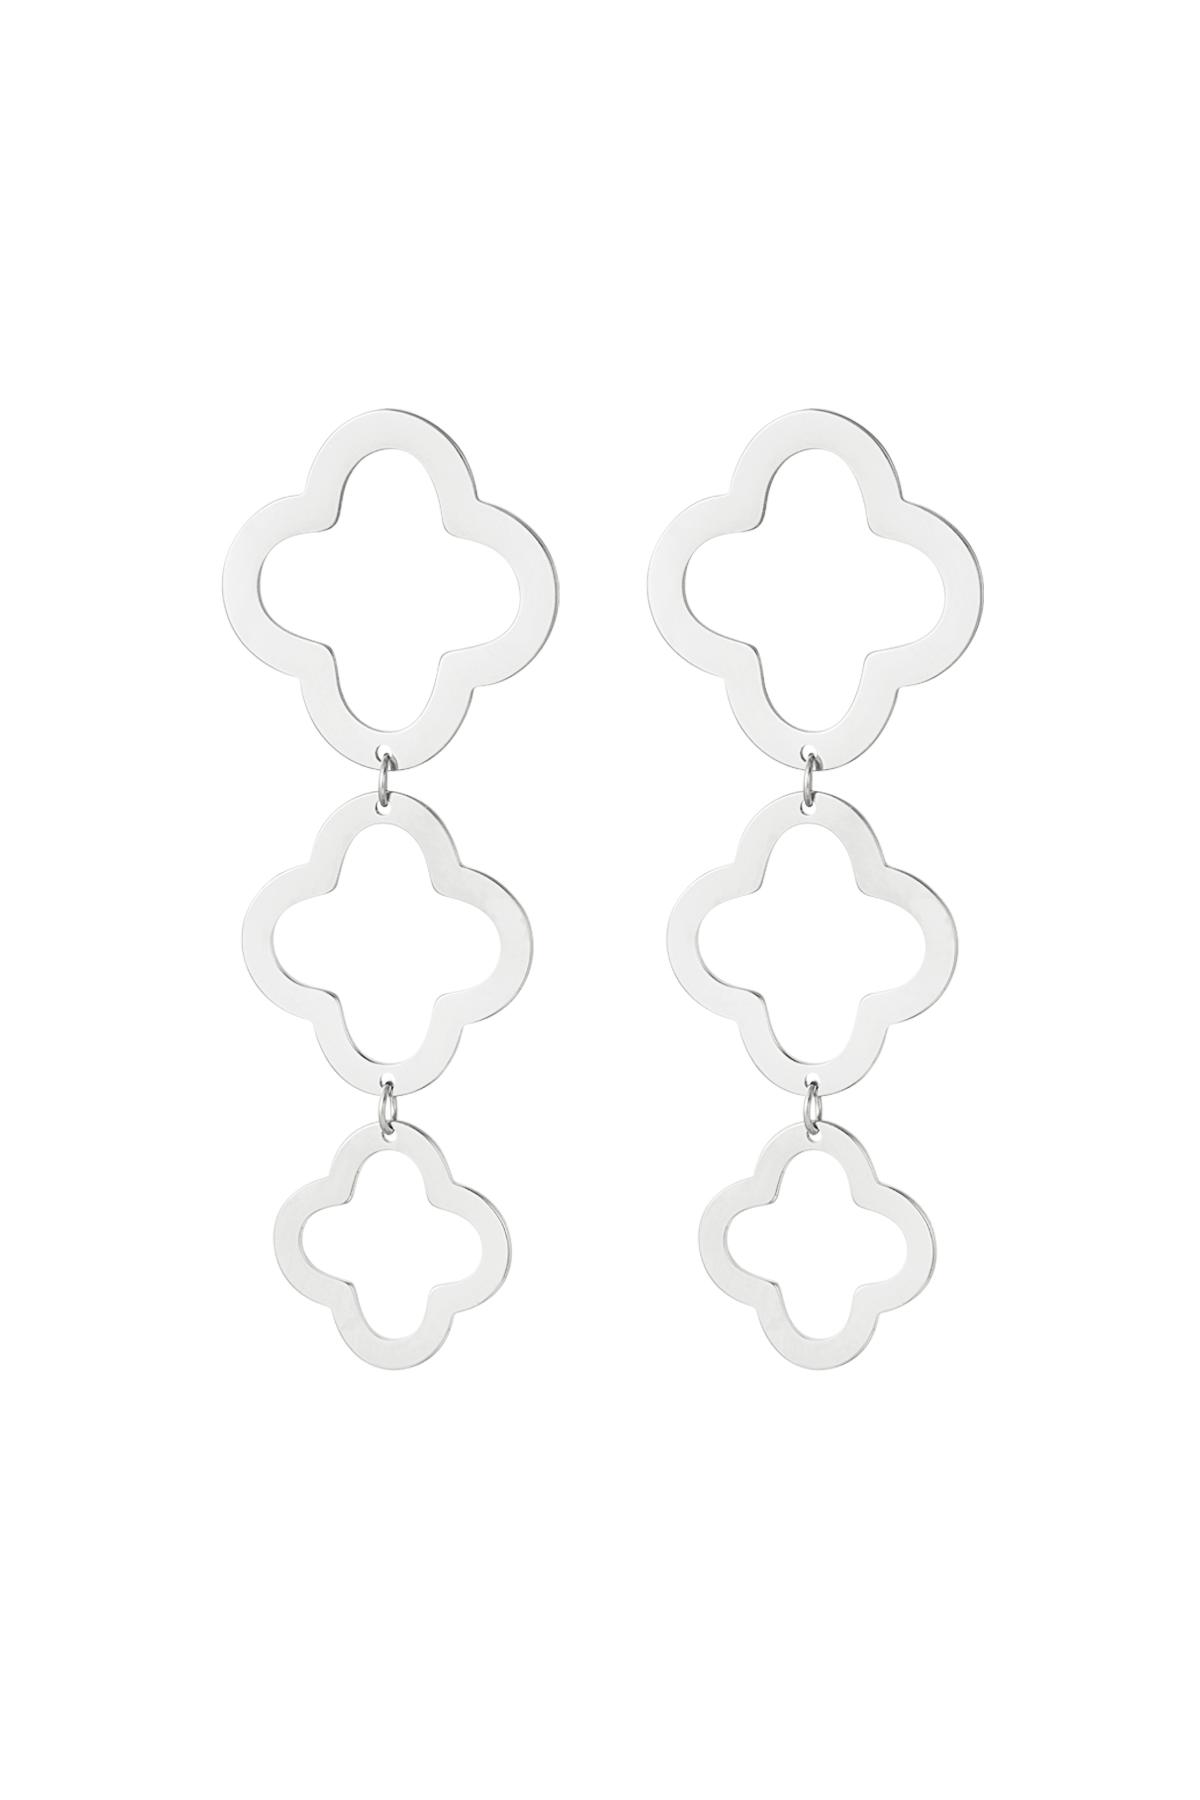 Statement earrings clovers Silver Stainless Steel h5 